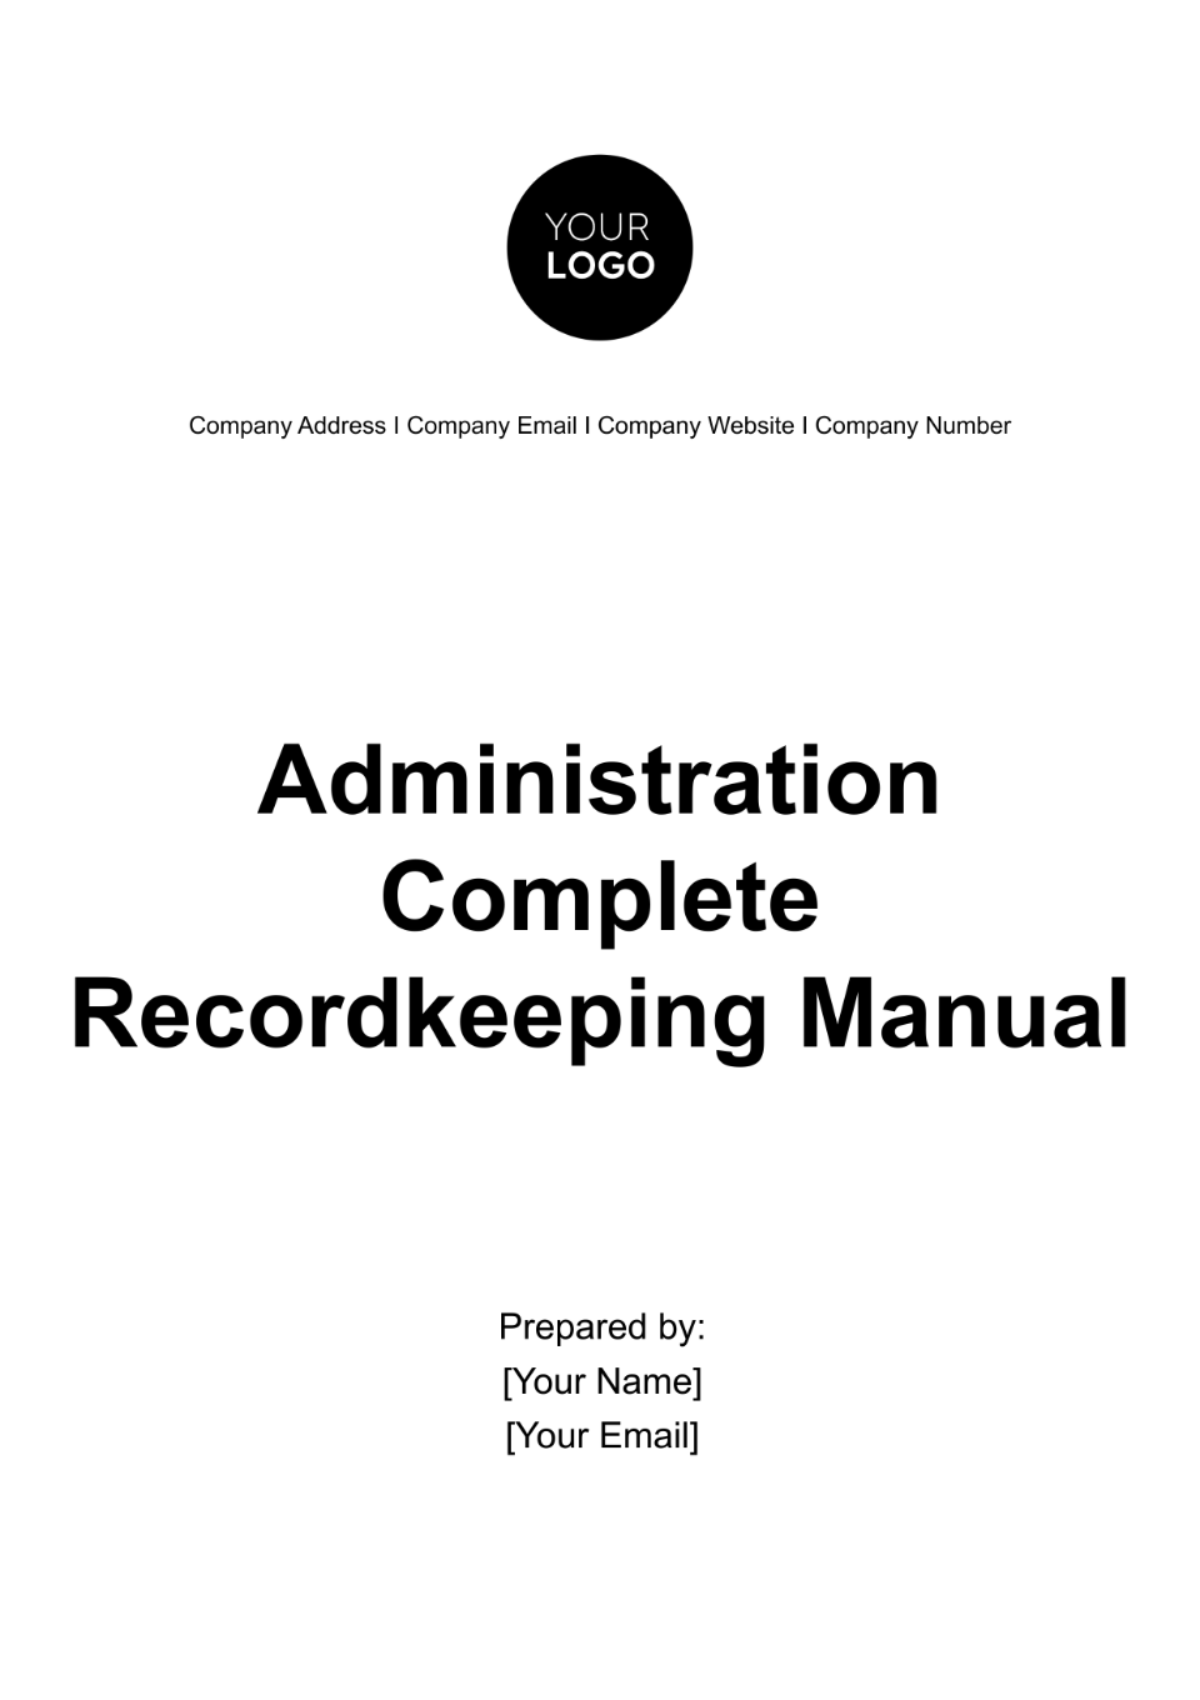 Administration Complete Recordkeeping Manual Template